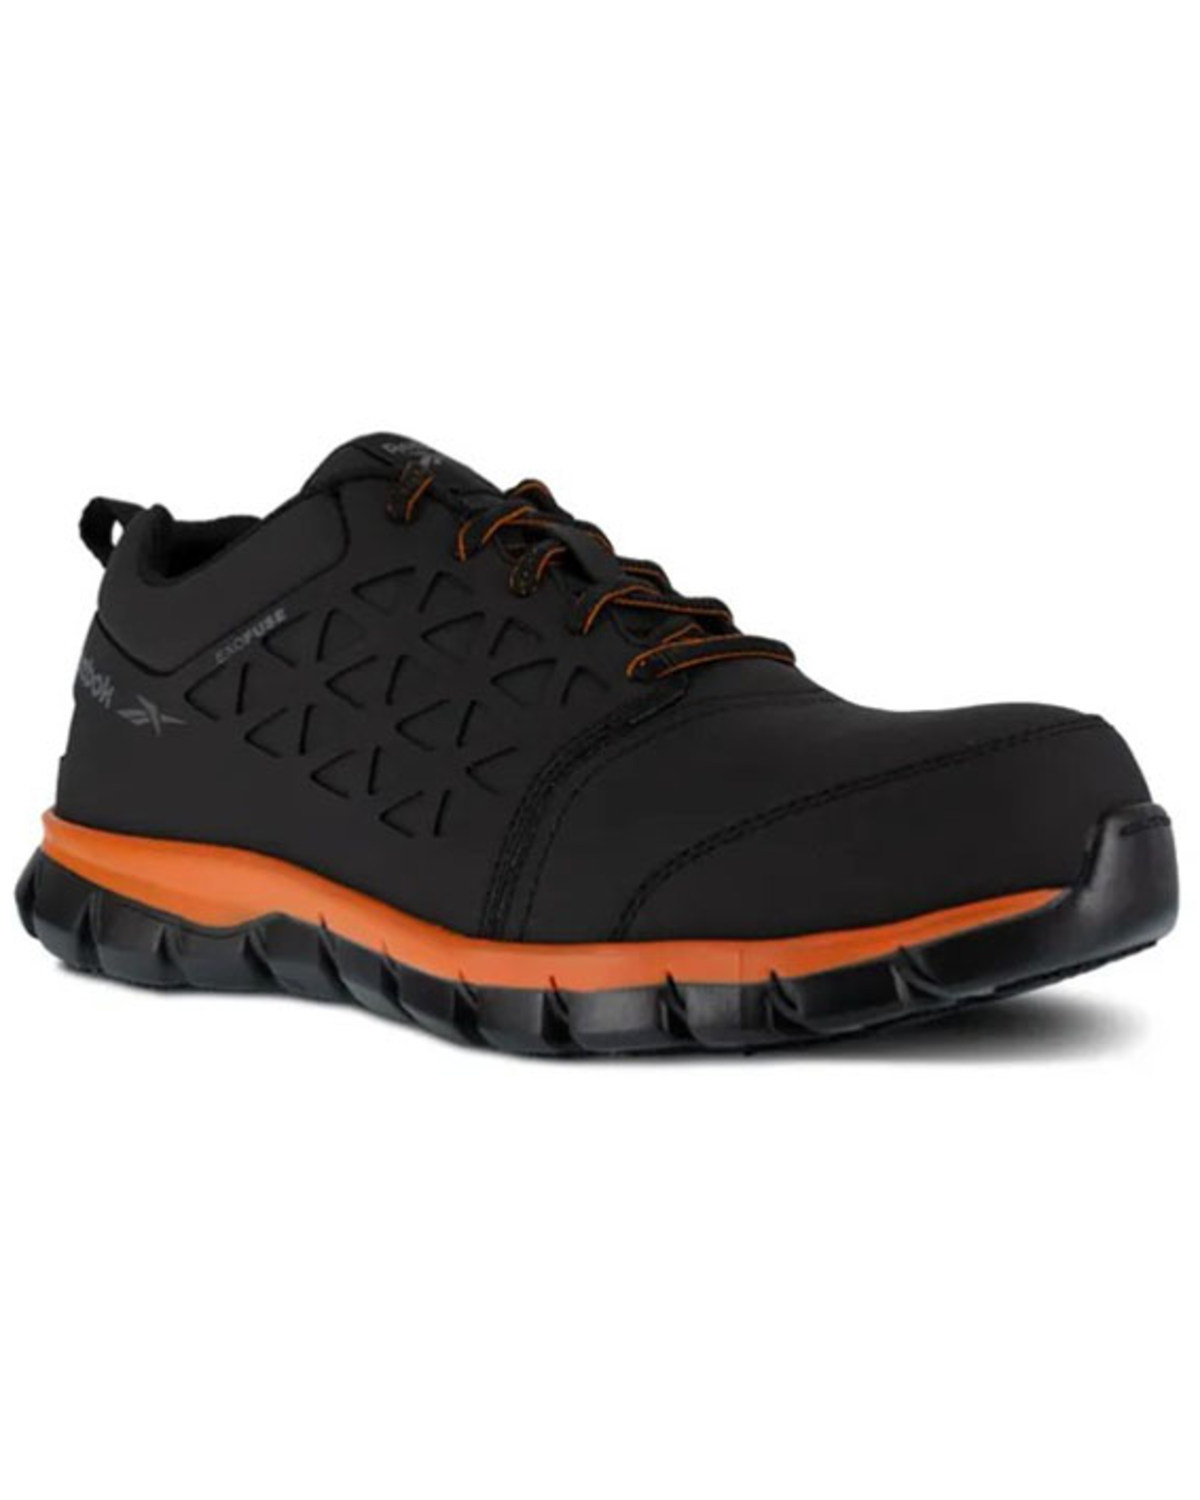 Reebok Men's Sublite Cushioned Work Shoes - Composite Toe | Boot Barn